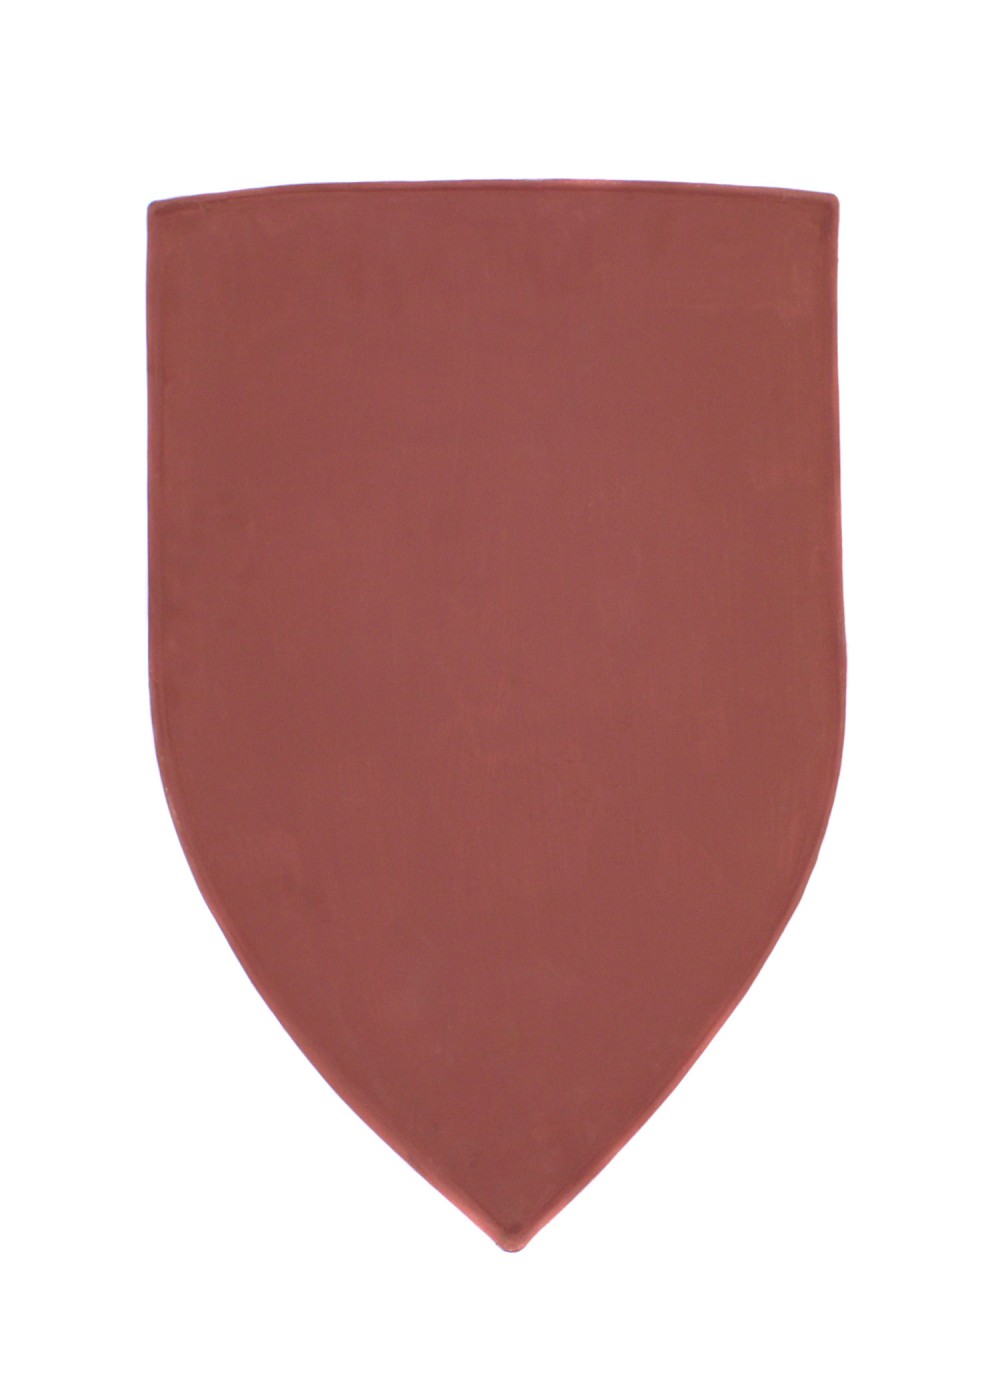 foto Shield, with red priming coat